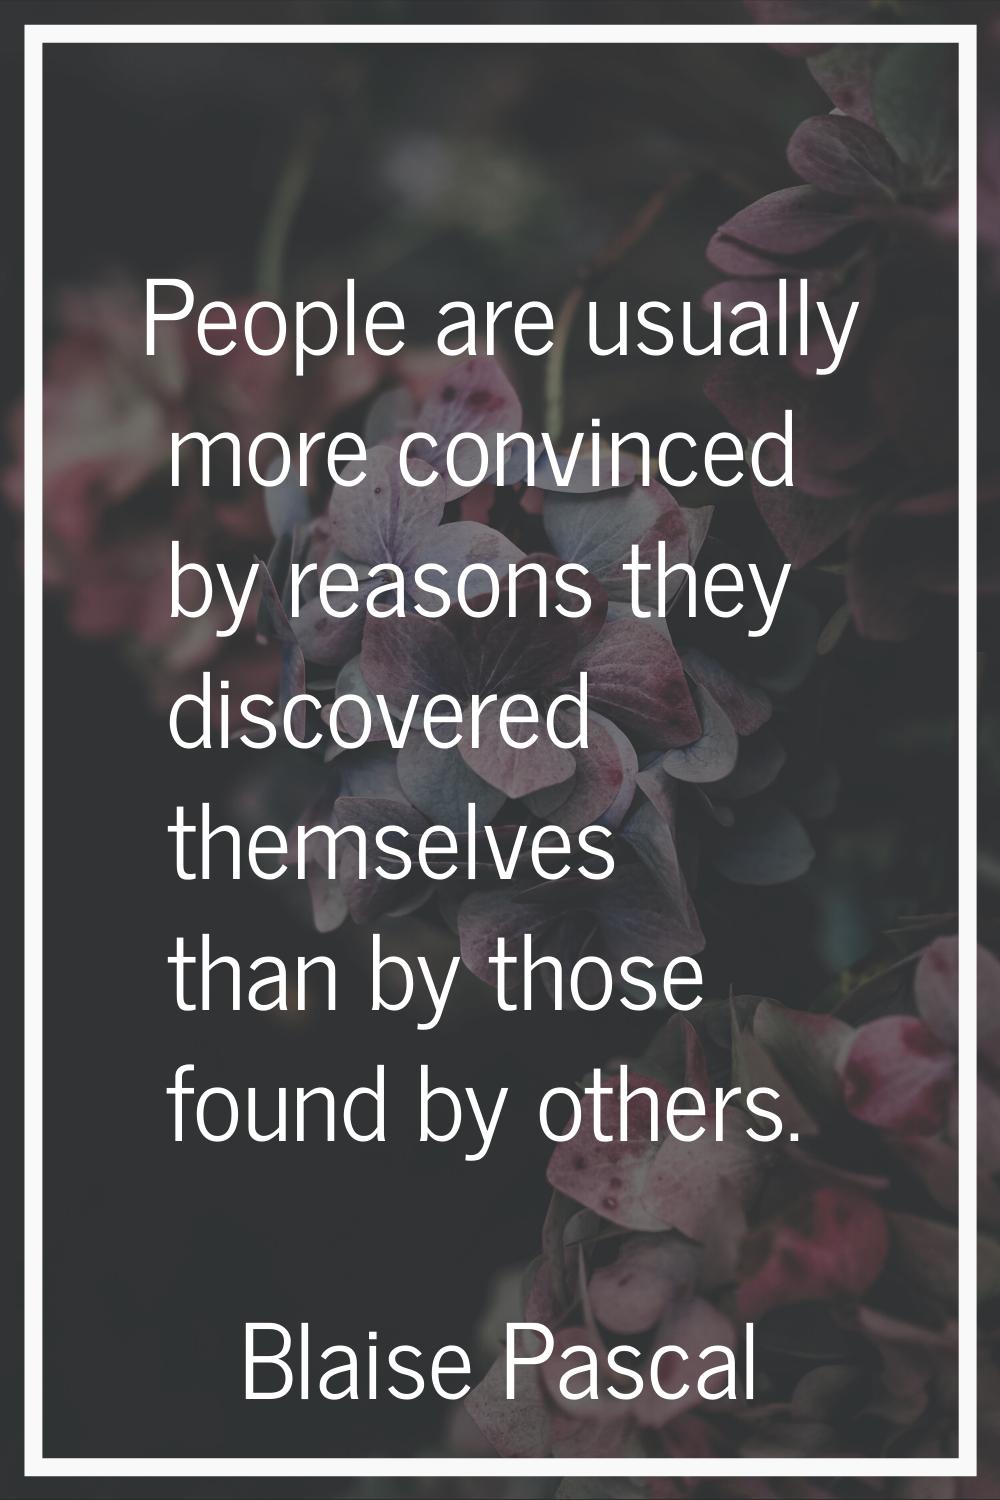 People are usually more convinced by reasons they discovered themselves than by those found by othe